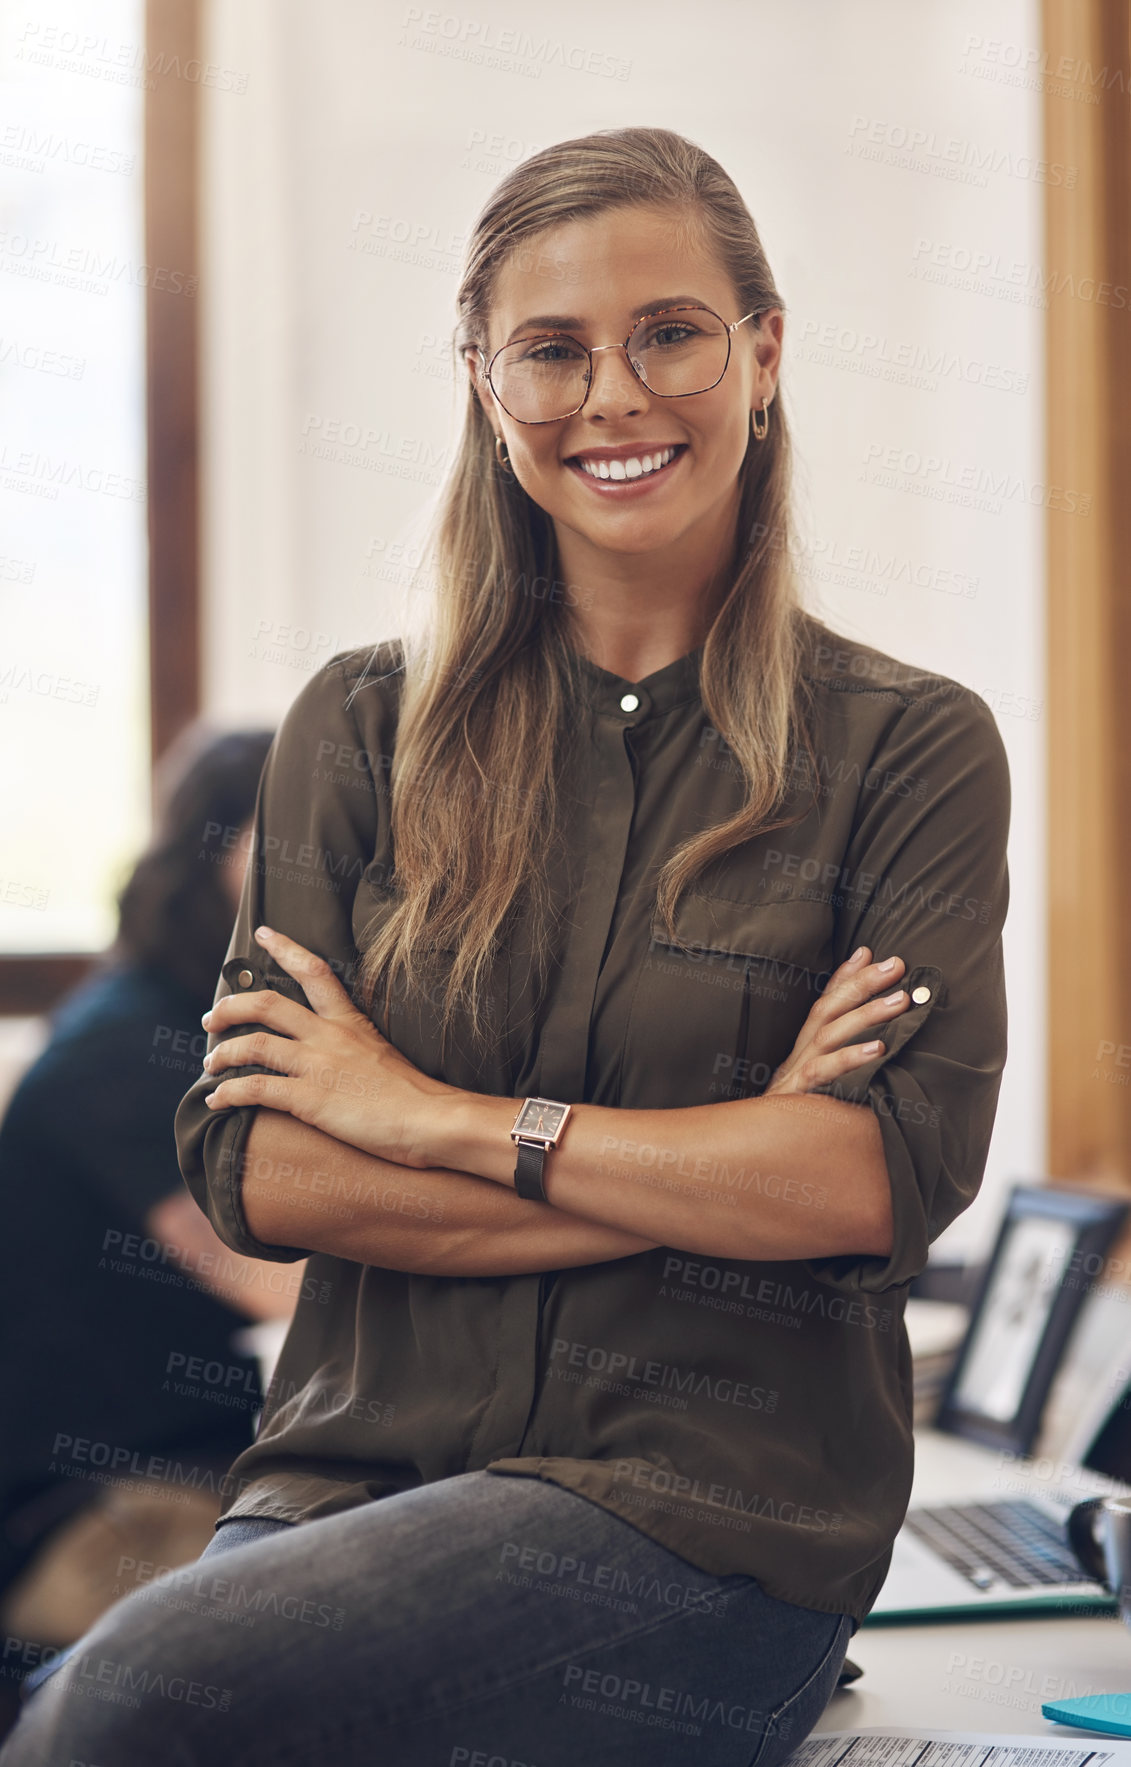 Buy stock photo Proud, confident and ambitious portrait of smiling leader at desk looking professional. Elegant, fashionable and successful woman with stylish glasses has a presentable style at the office. 